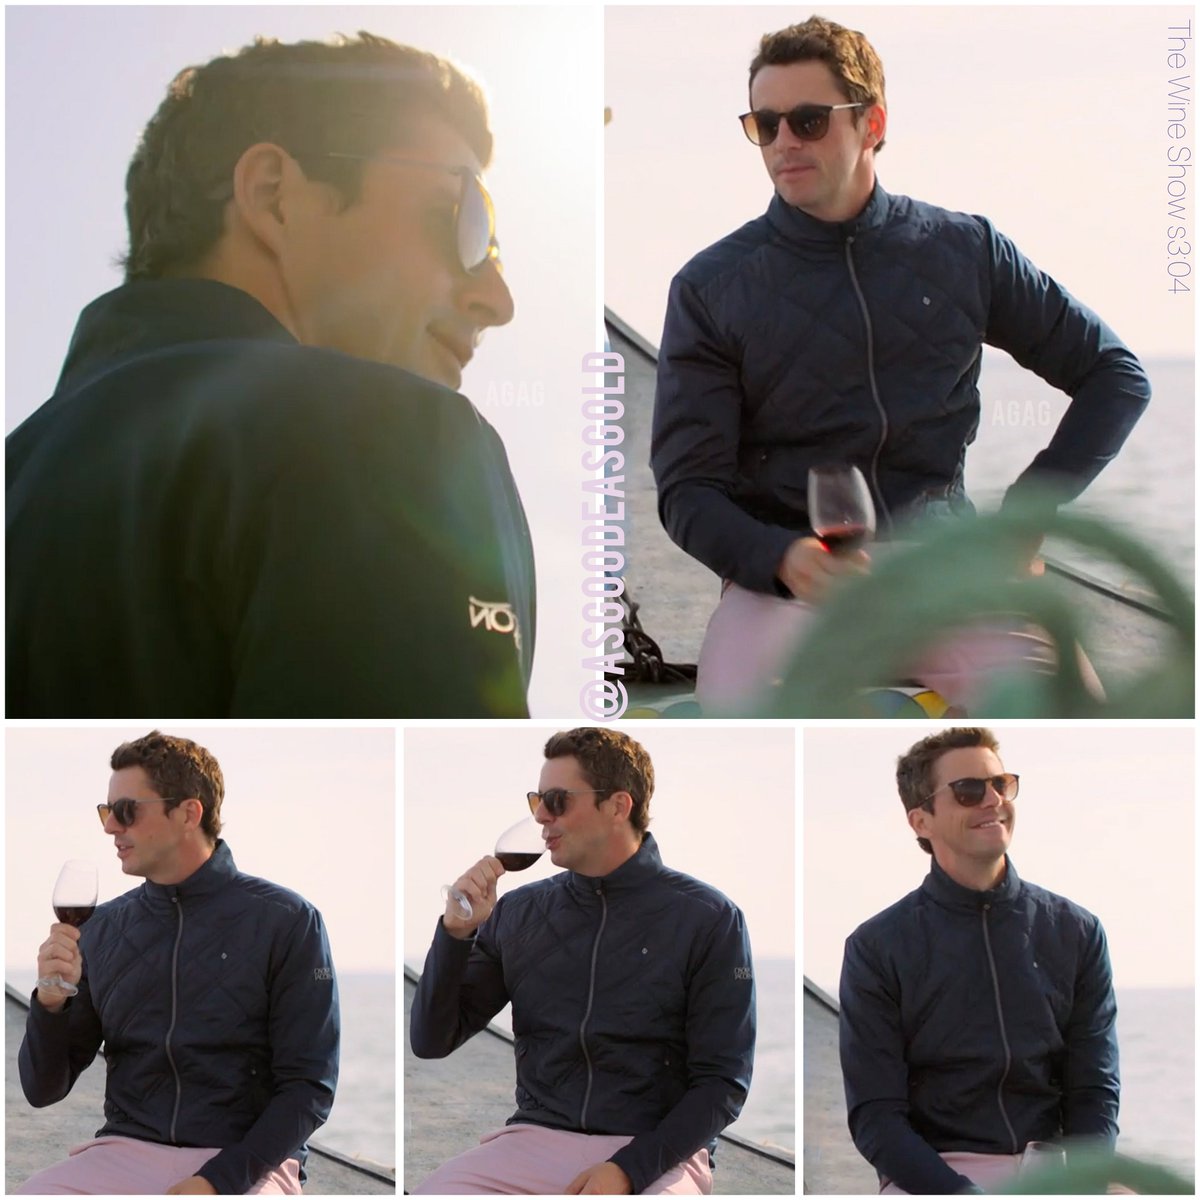 How rude, it's Monday, in February (which apparently is January in disguise). I thought #matthewgoode sailing into the sunset, sipping wine & wearing pink trousers (I LOVE the look 🩷) might be a goode way to start the week. 
#thewineshowtv
📷 The Wine Show (2020) s3:04 my edit